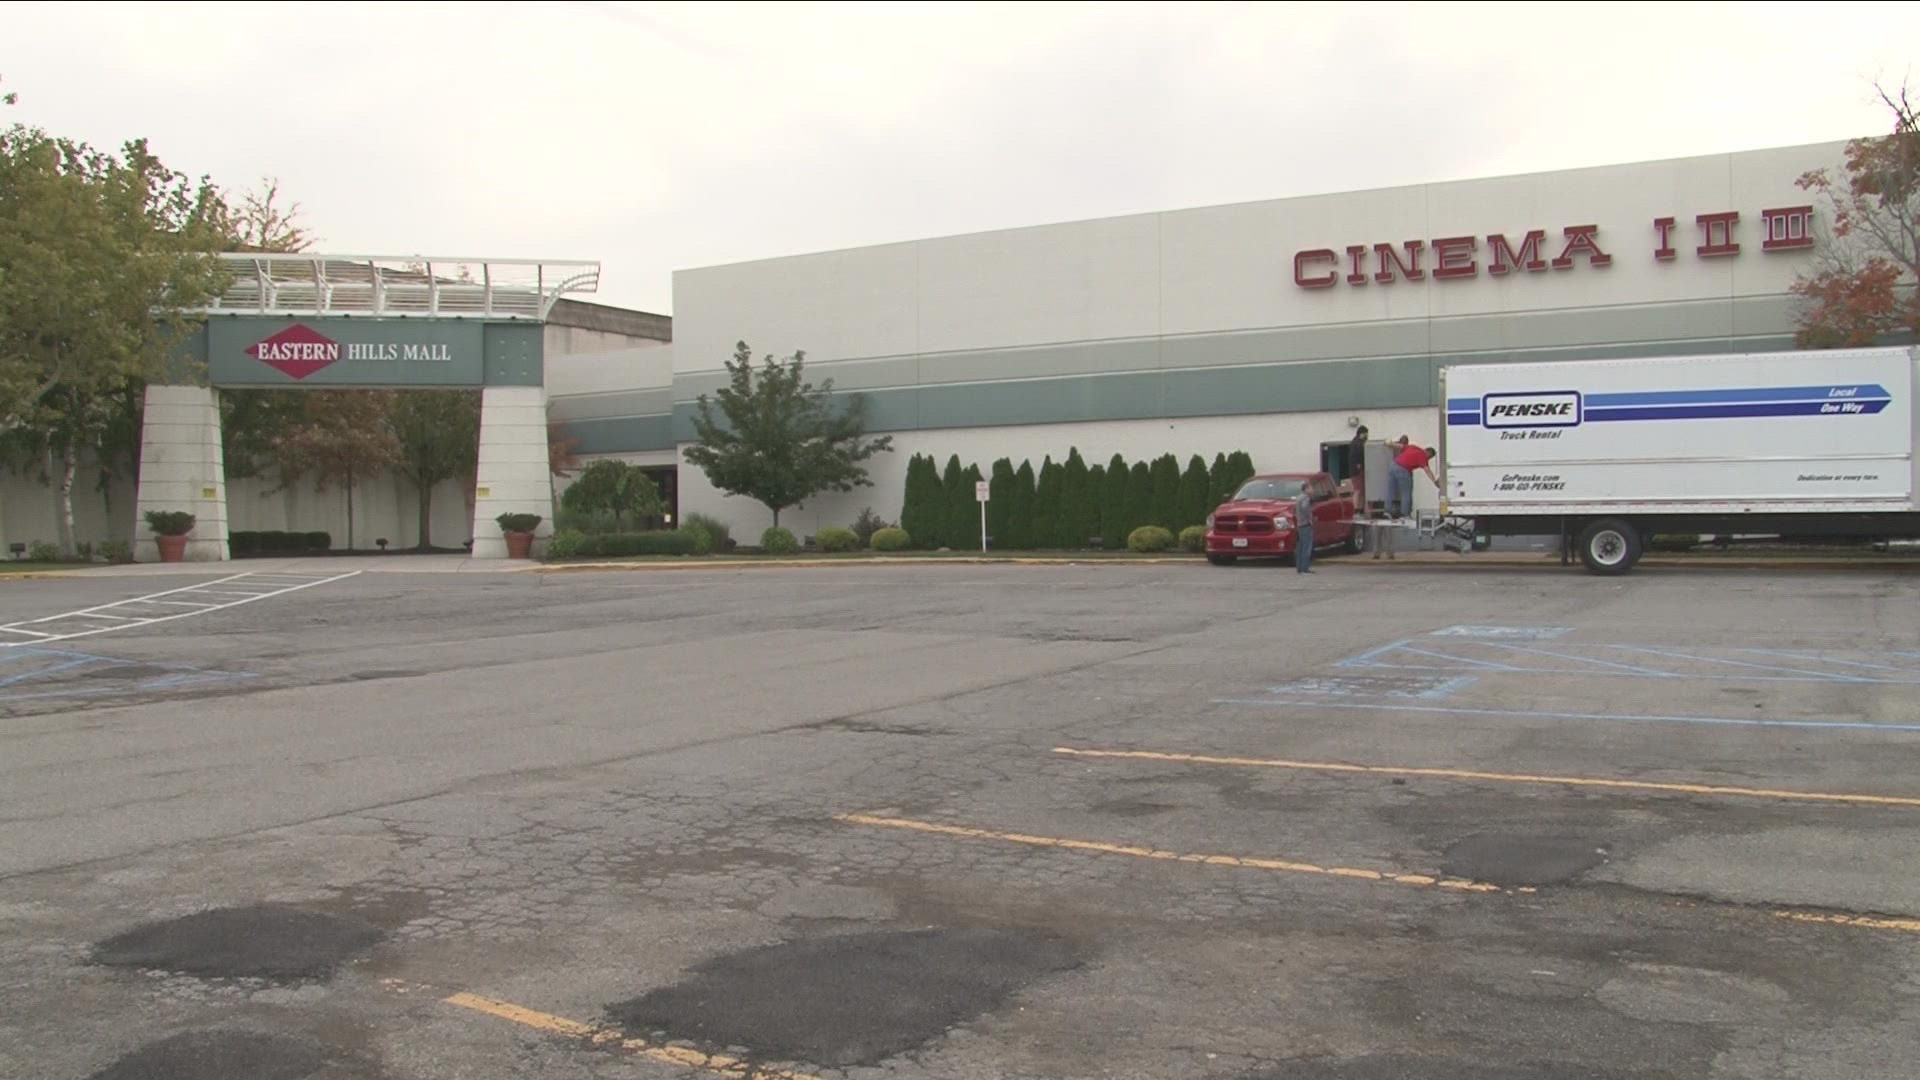 Dipson Theatres close it's location at the Eastern Hills Mall